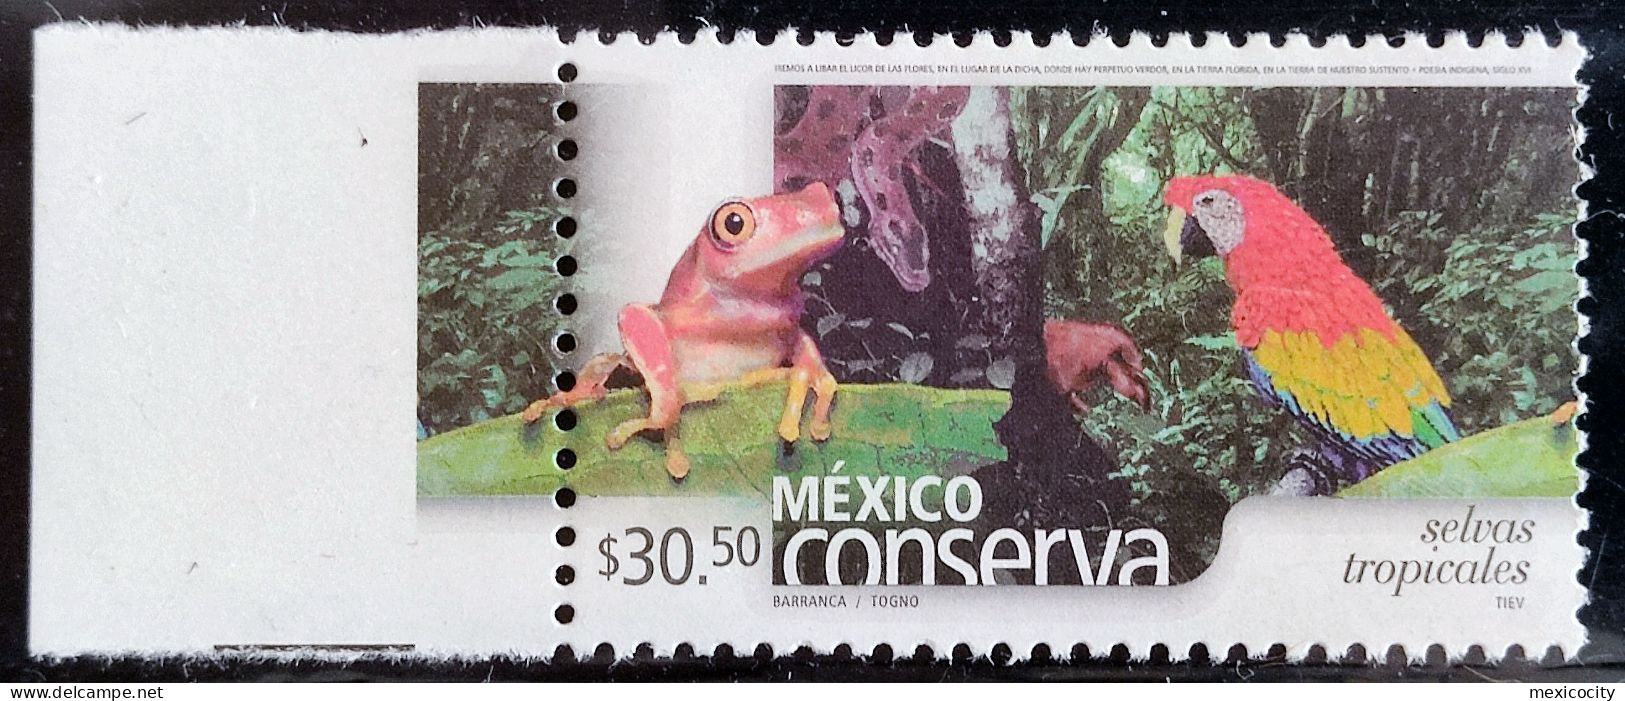 MEXICO $30.50 TROP. JUNGLES 2005 Beater Series Ltd. Issue, Border Single Mint NH Unmounted - Mexico